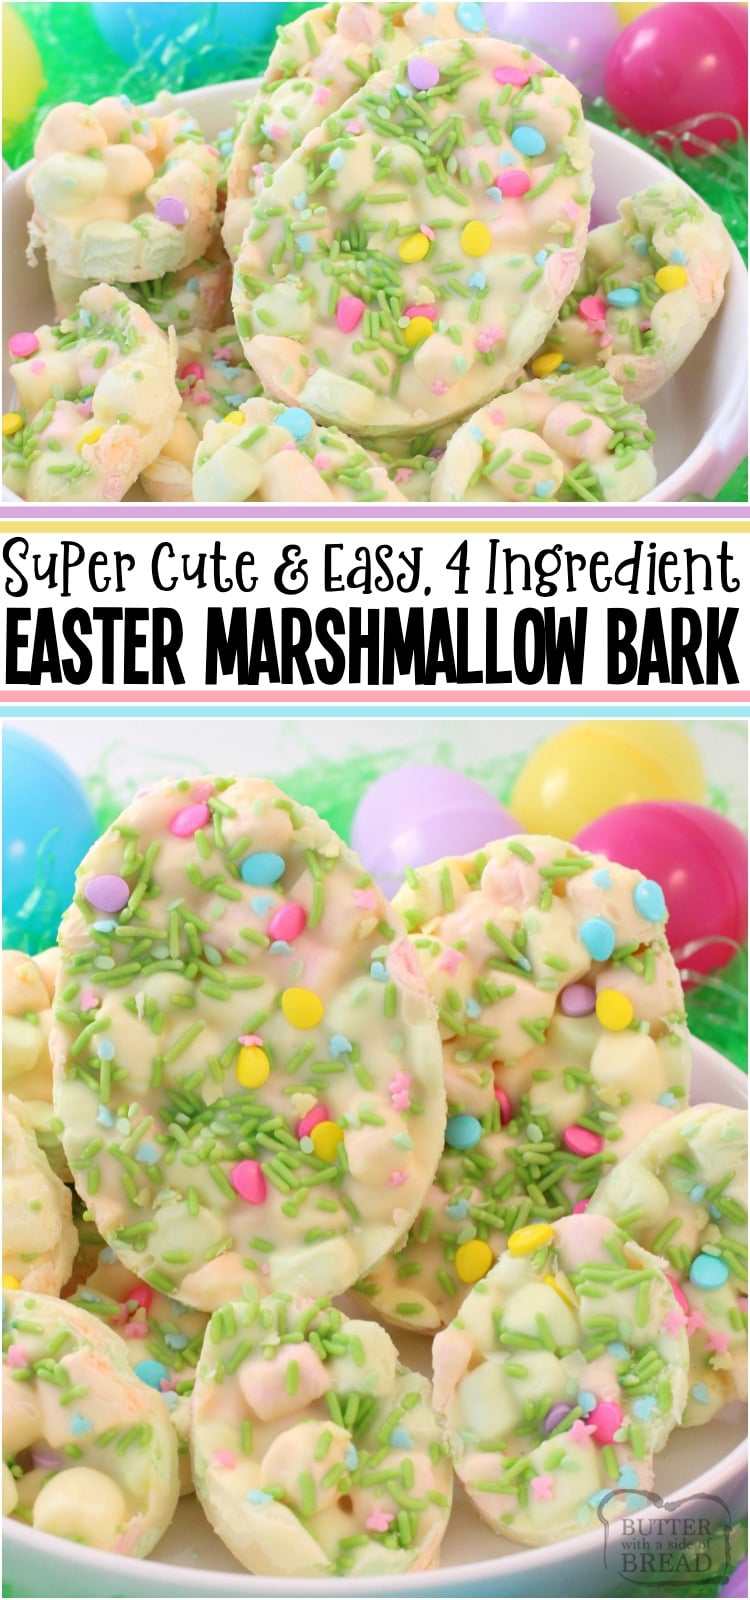 Easter Marshmallow Bark is one of my favorite Easter desserts! Just 4 ingredients and a few minutes to make this cute and festive Easter treat. Everyone enjoys our Easter Marshmallow Bark! #Easter #Dessert #whitechocolate #marshmallows #pastel #candy #recipe from BUTTER WITH A SIDE OF BREAD